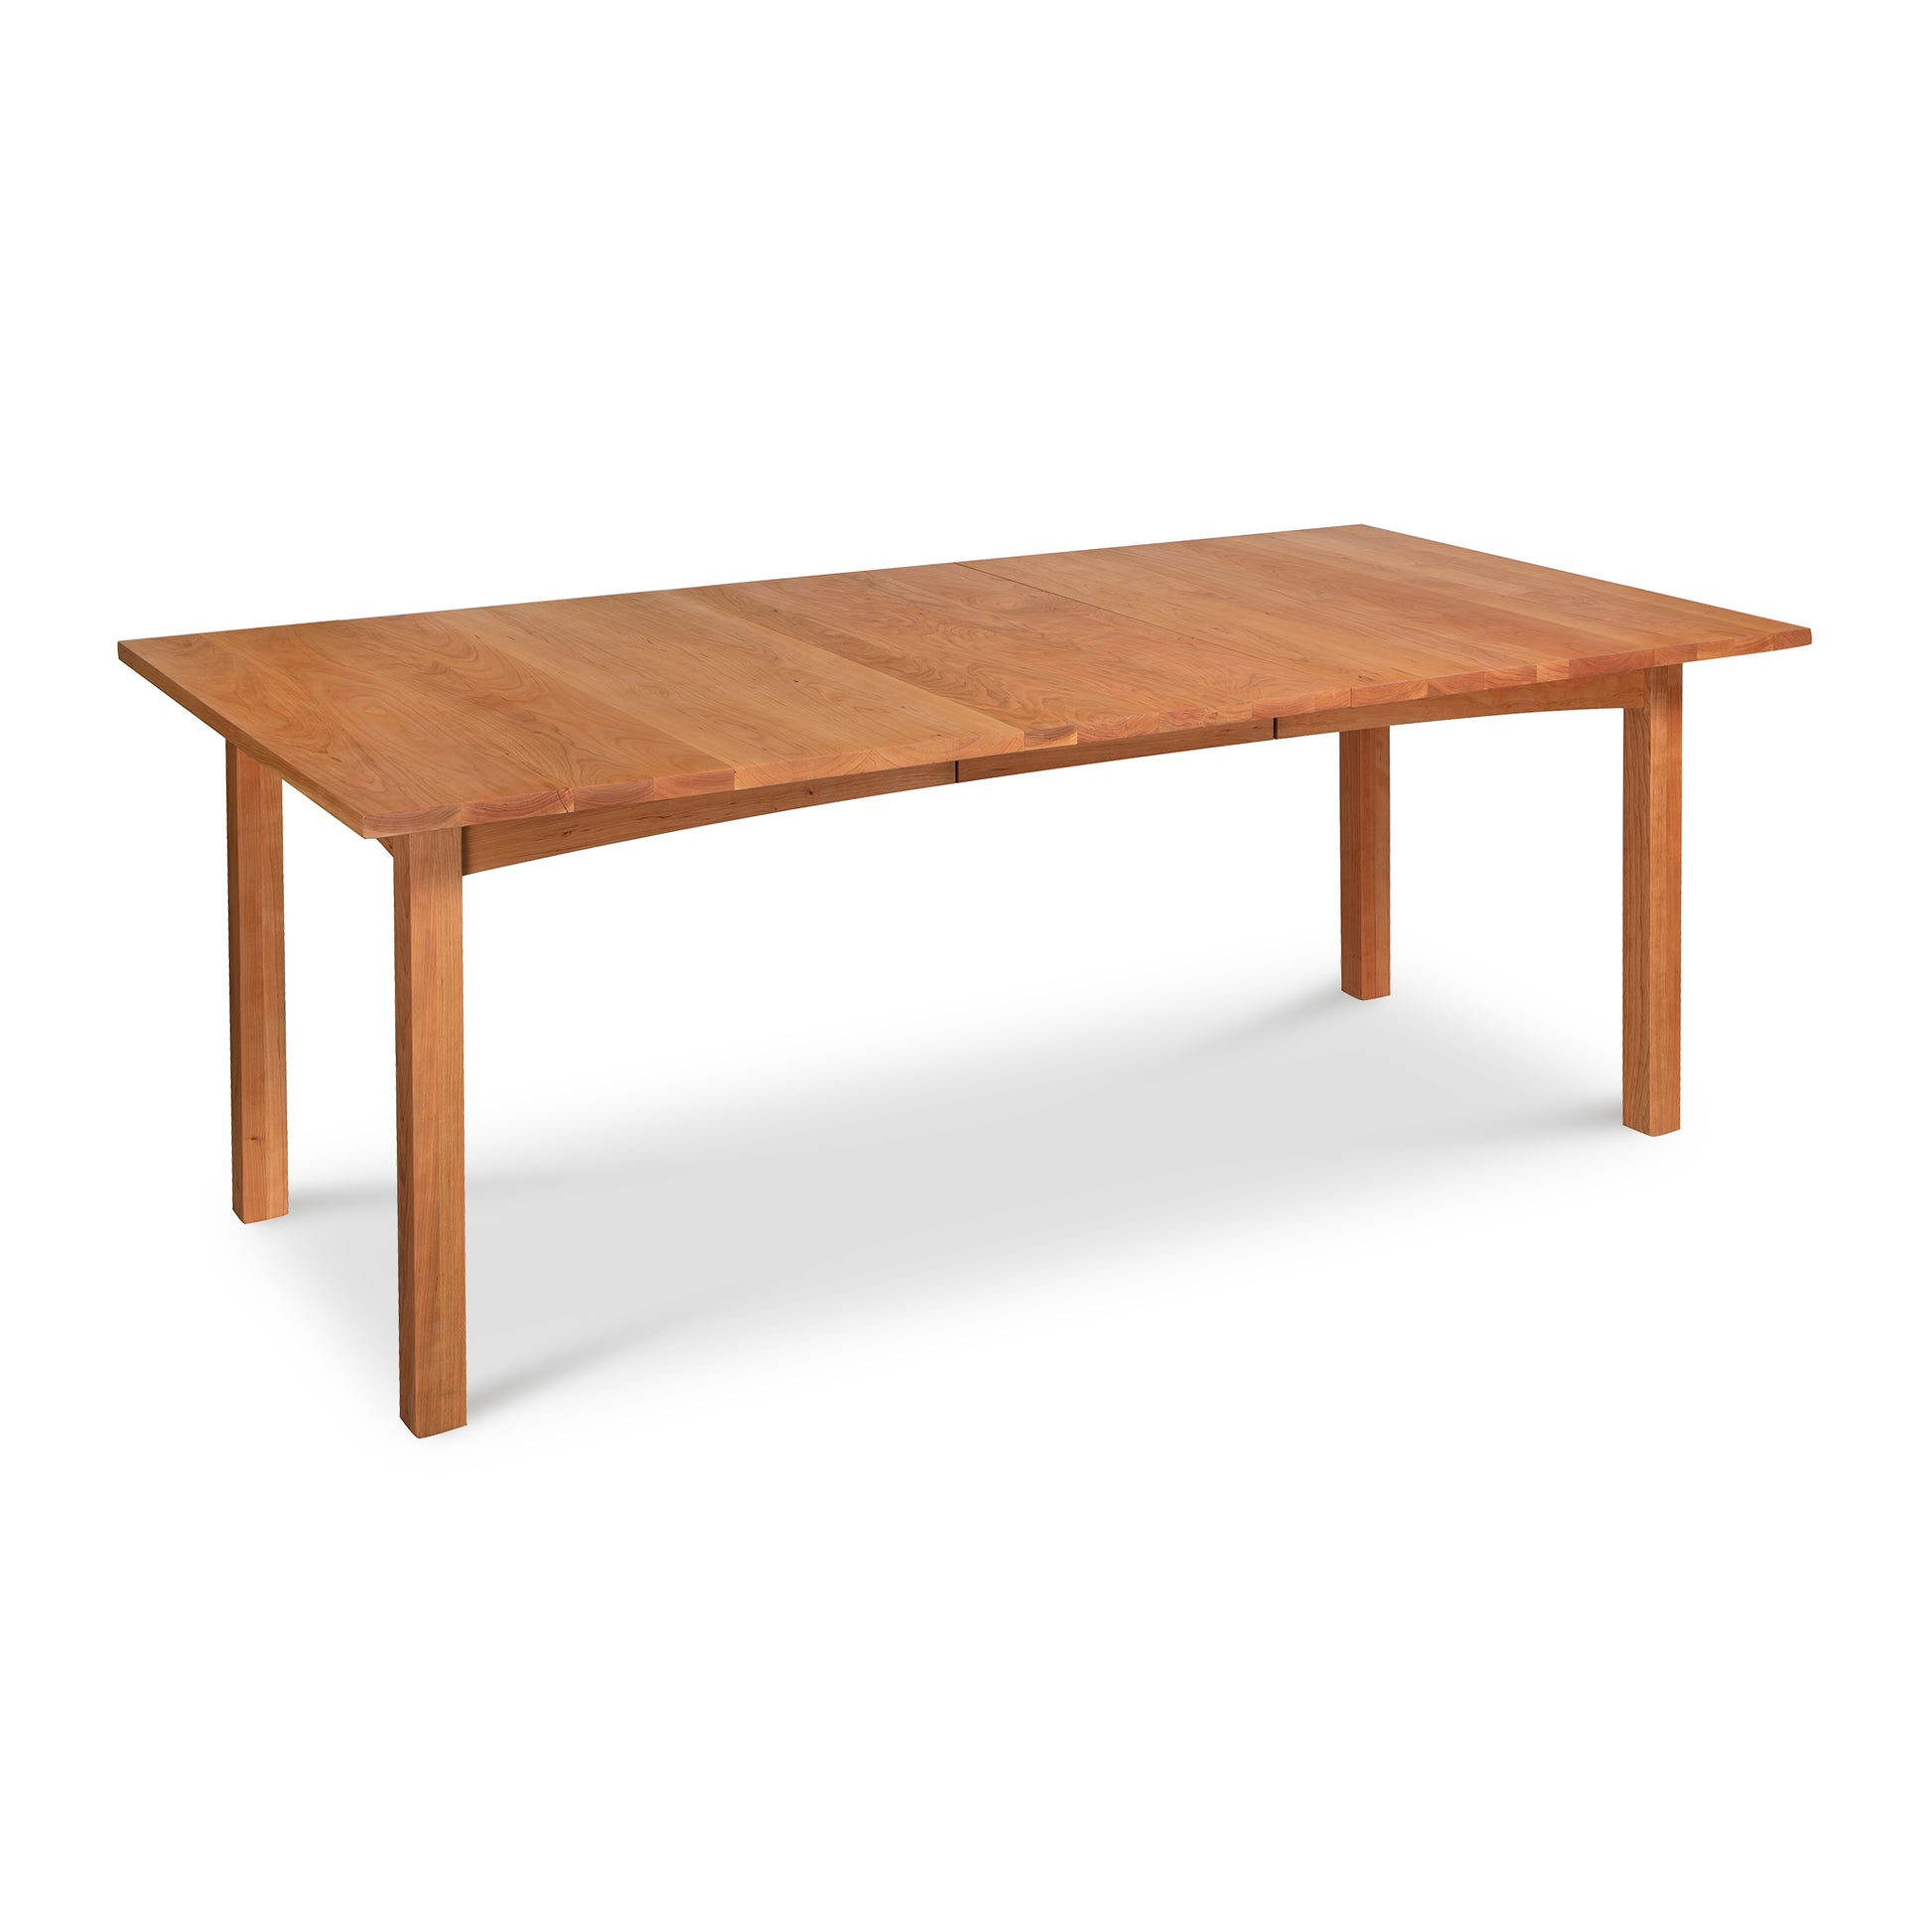 A Burlington Shaker Extension Dining Table - Floor Model with a smooth finish and simple, straight legs, crafted from solid hardwood construction by Vermont Furniture Designs, isolated on a white background.